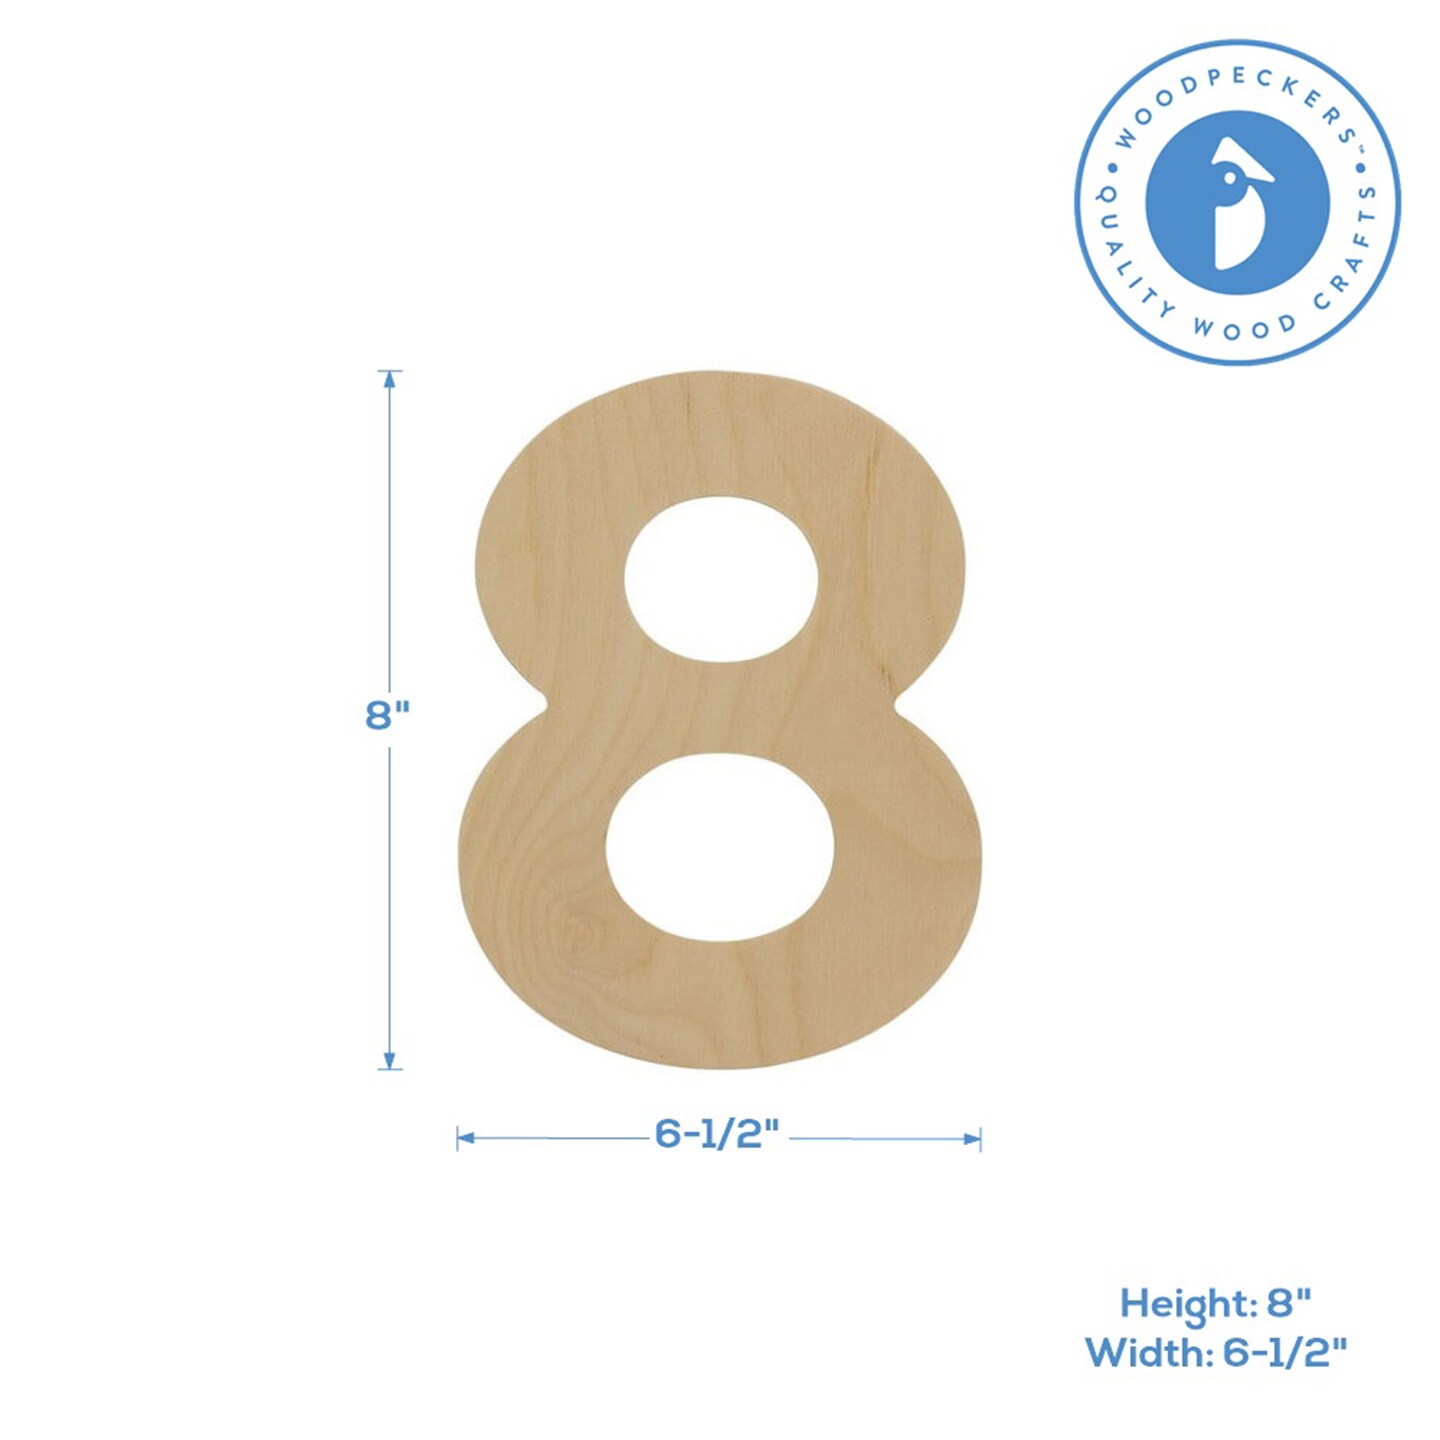 Wooden Number 8, 12 inch or 8 inch, Unfinished Large Wood Numbers for Crafts | Woodpeckers